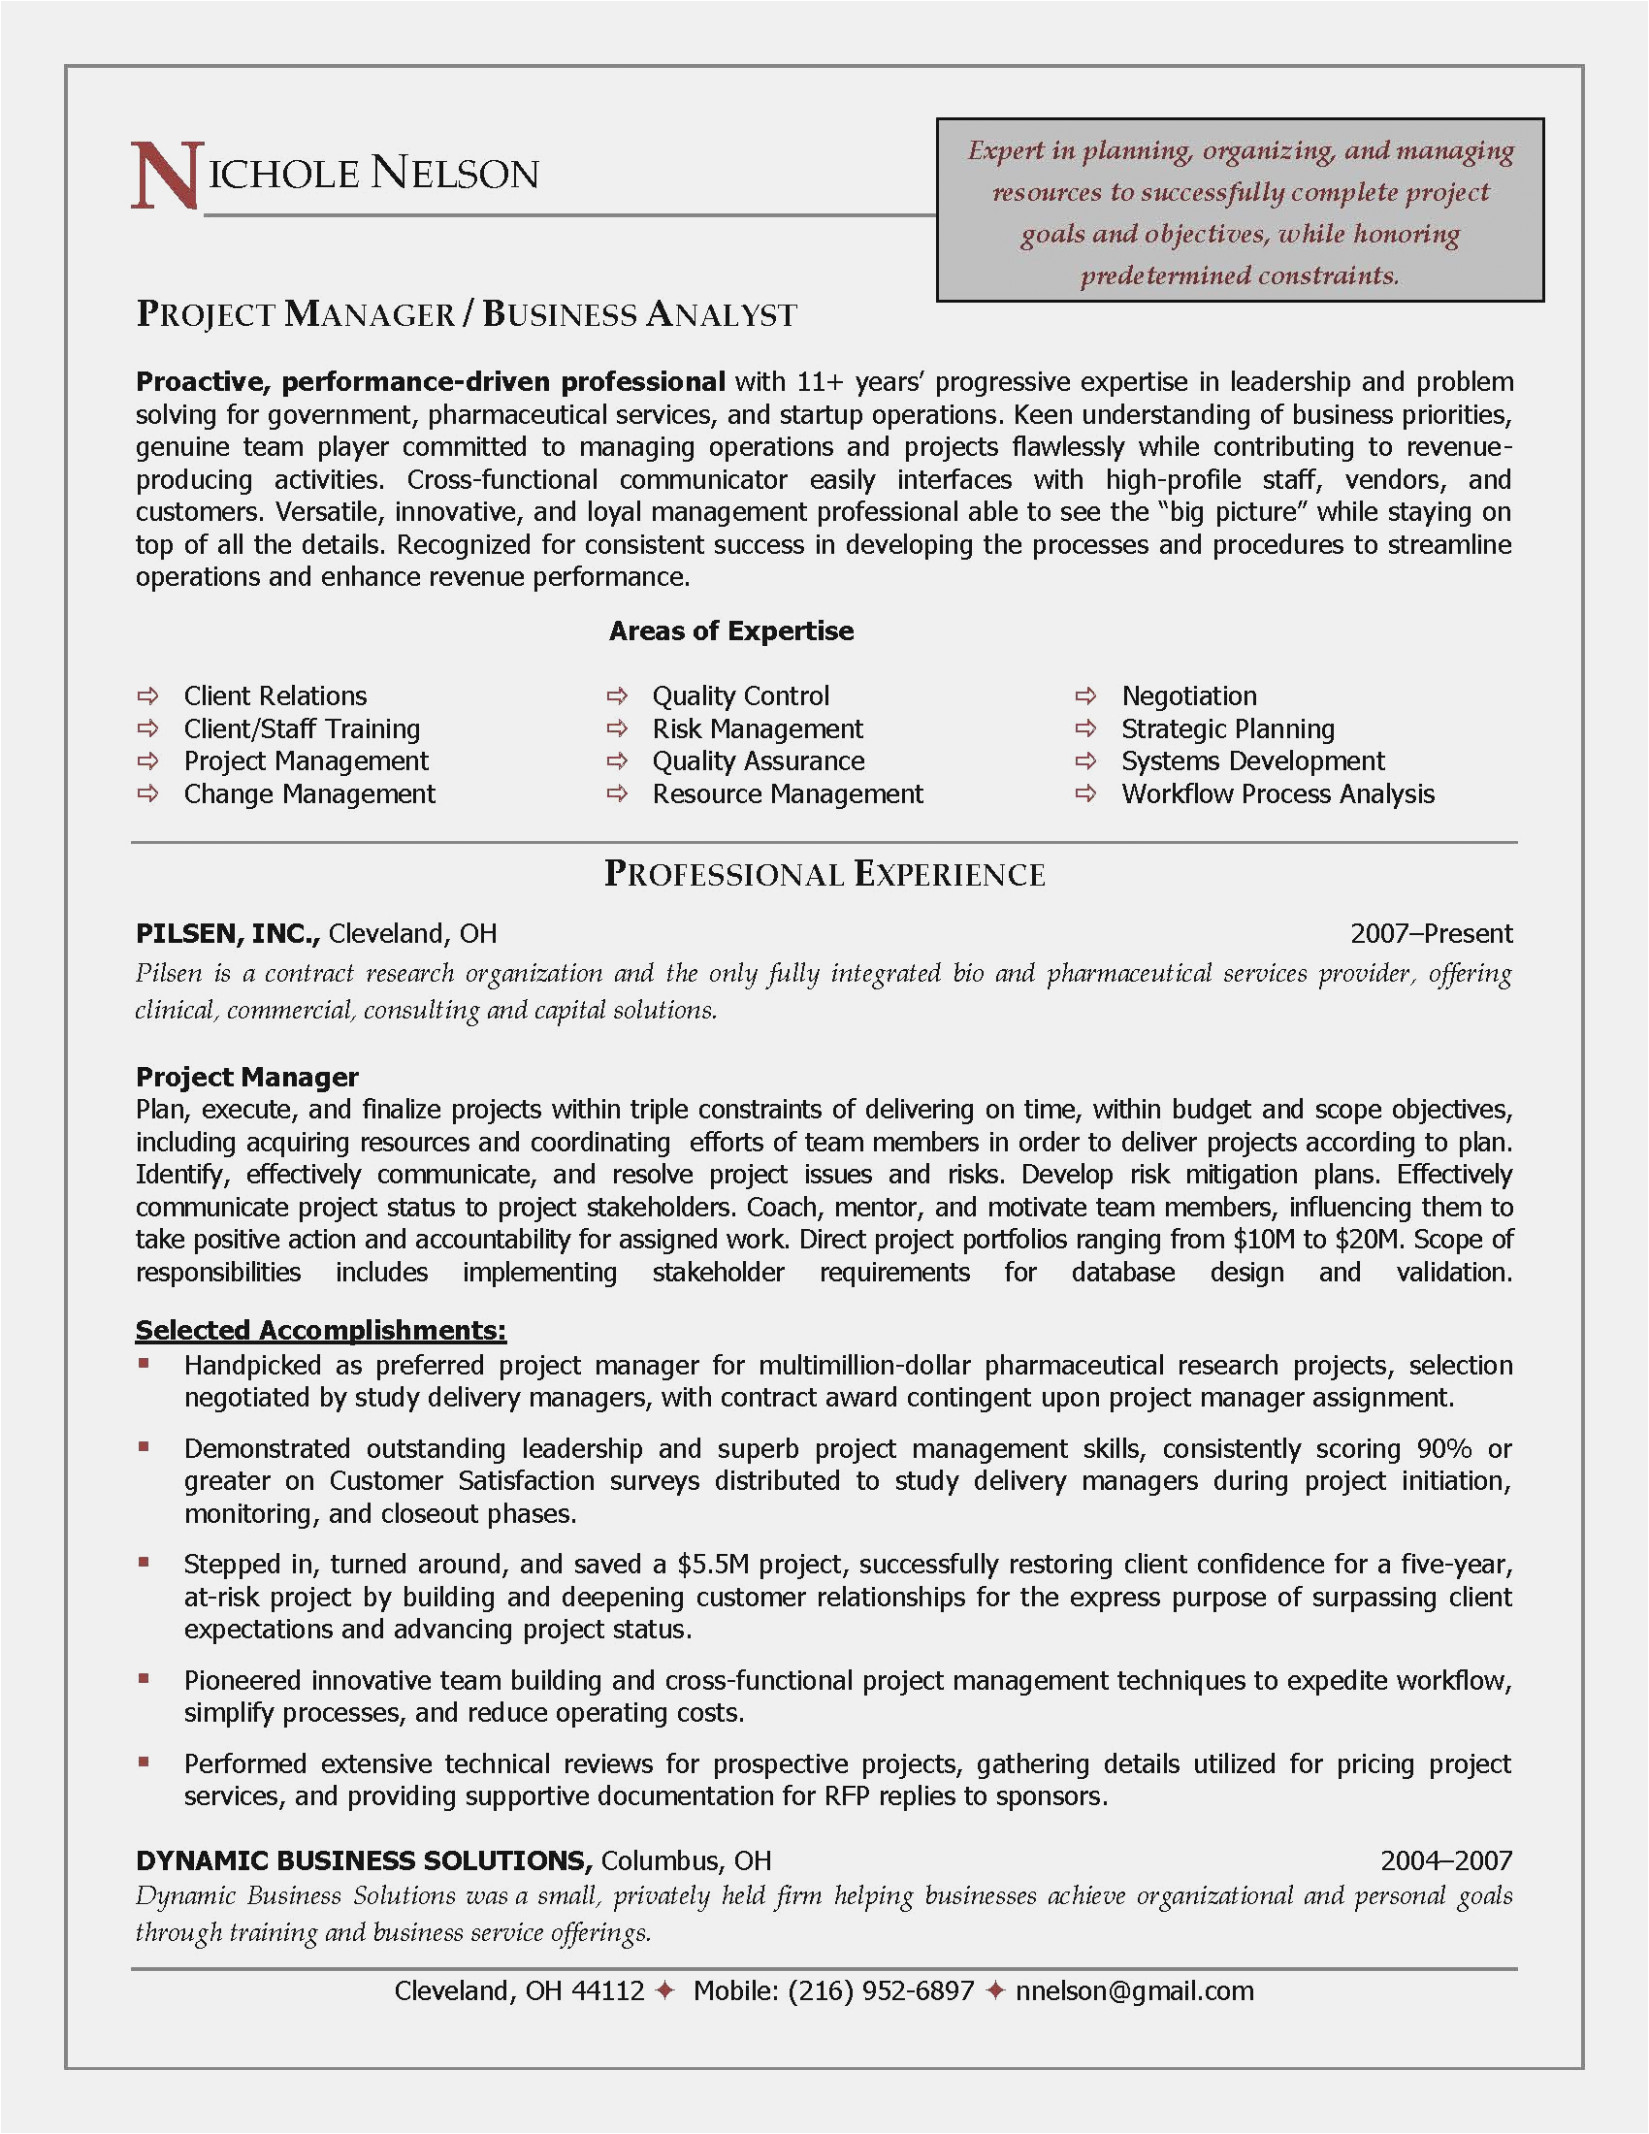 Sample Skills and Abilities for Management Resume 12 Management Skills Resume Example Radaircars